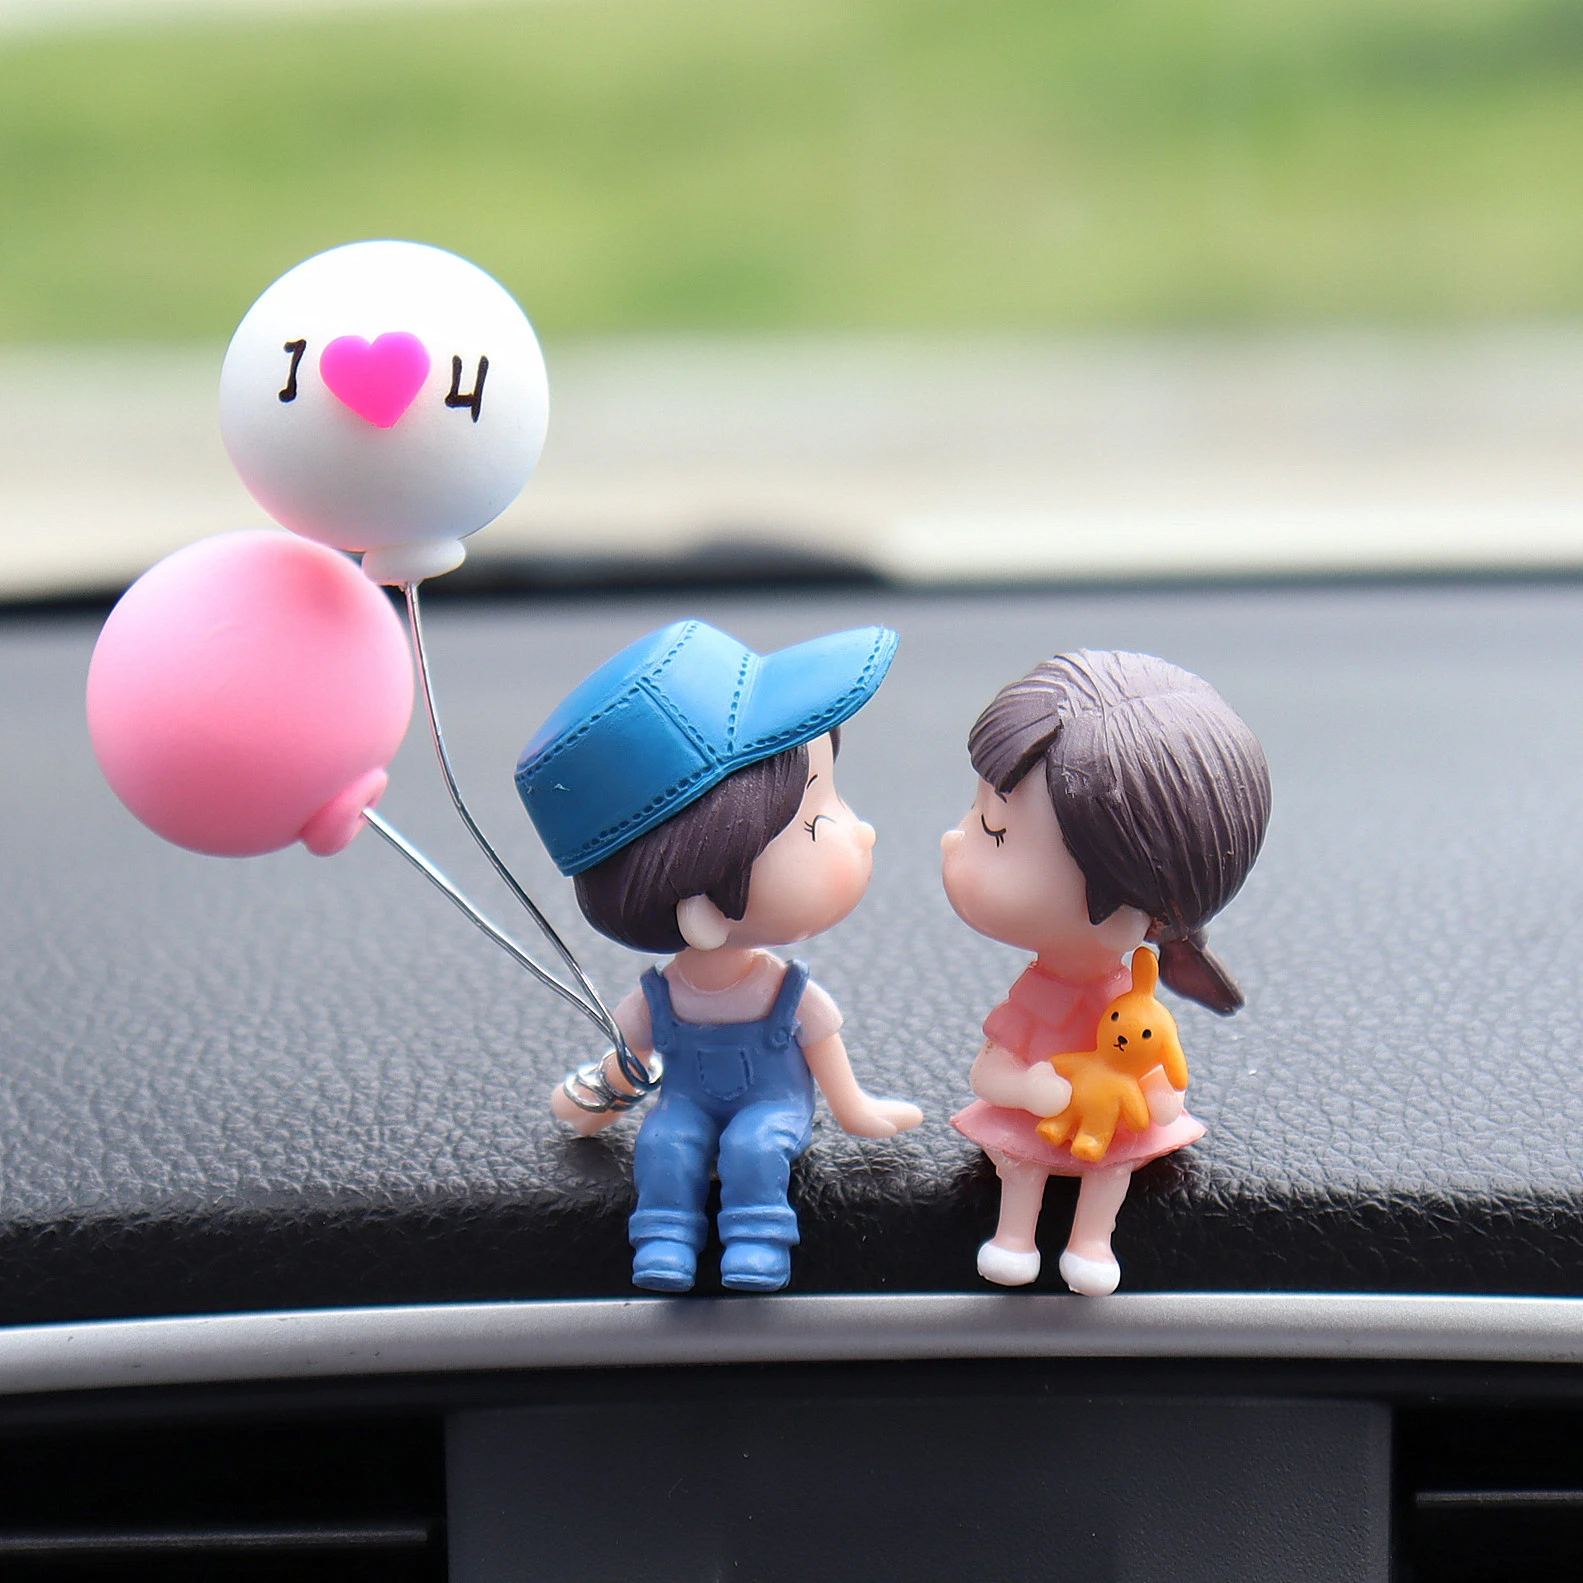 Car Ornaments Cute Cartoon Couple Action Figures Ornaments Balloon Ornaments Car Interior Instrument Panel Accessories Gifts miniature people figurines